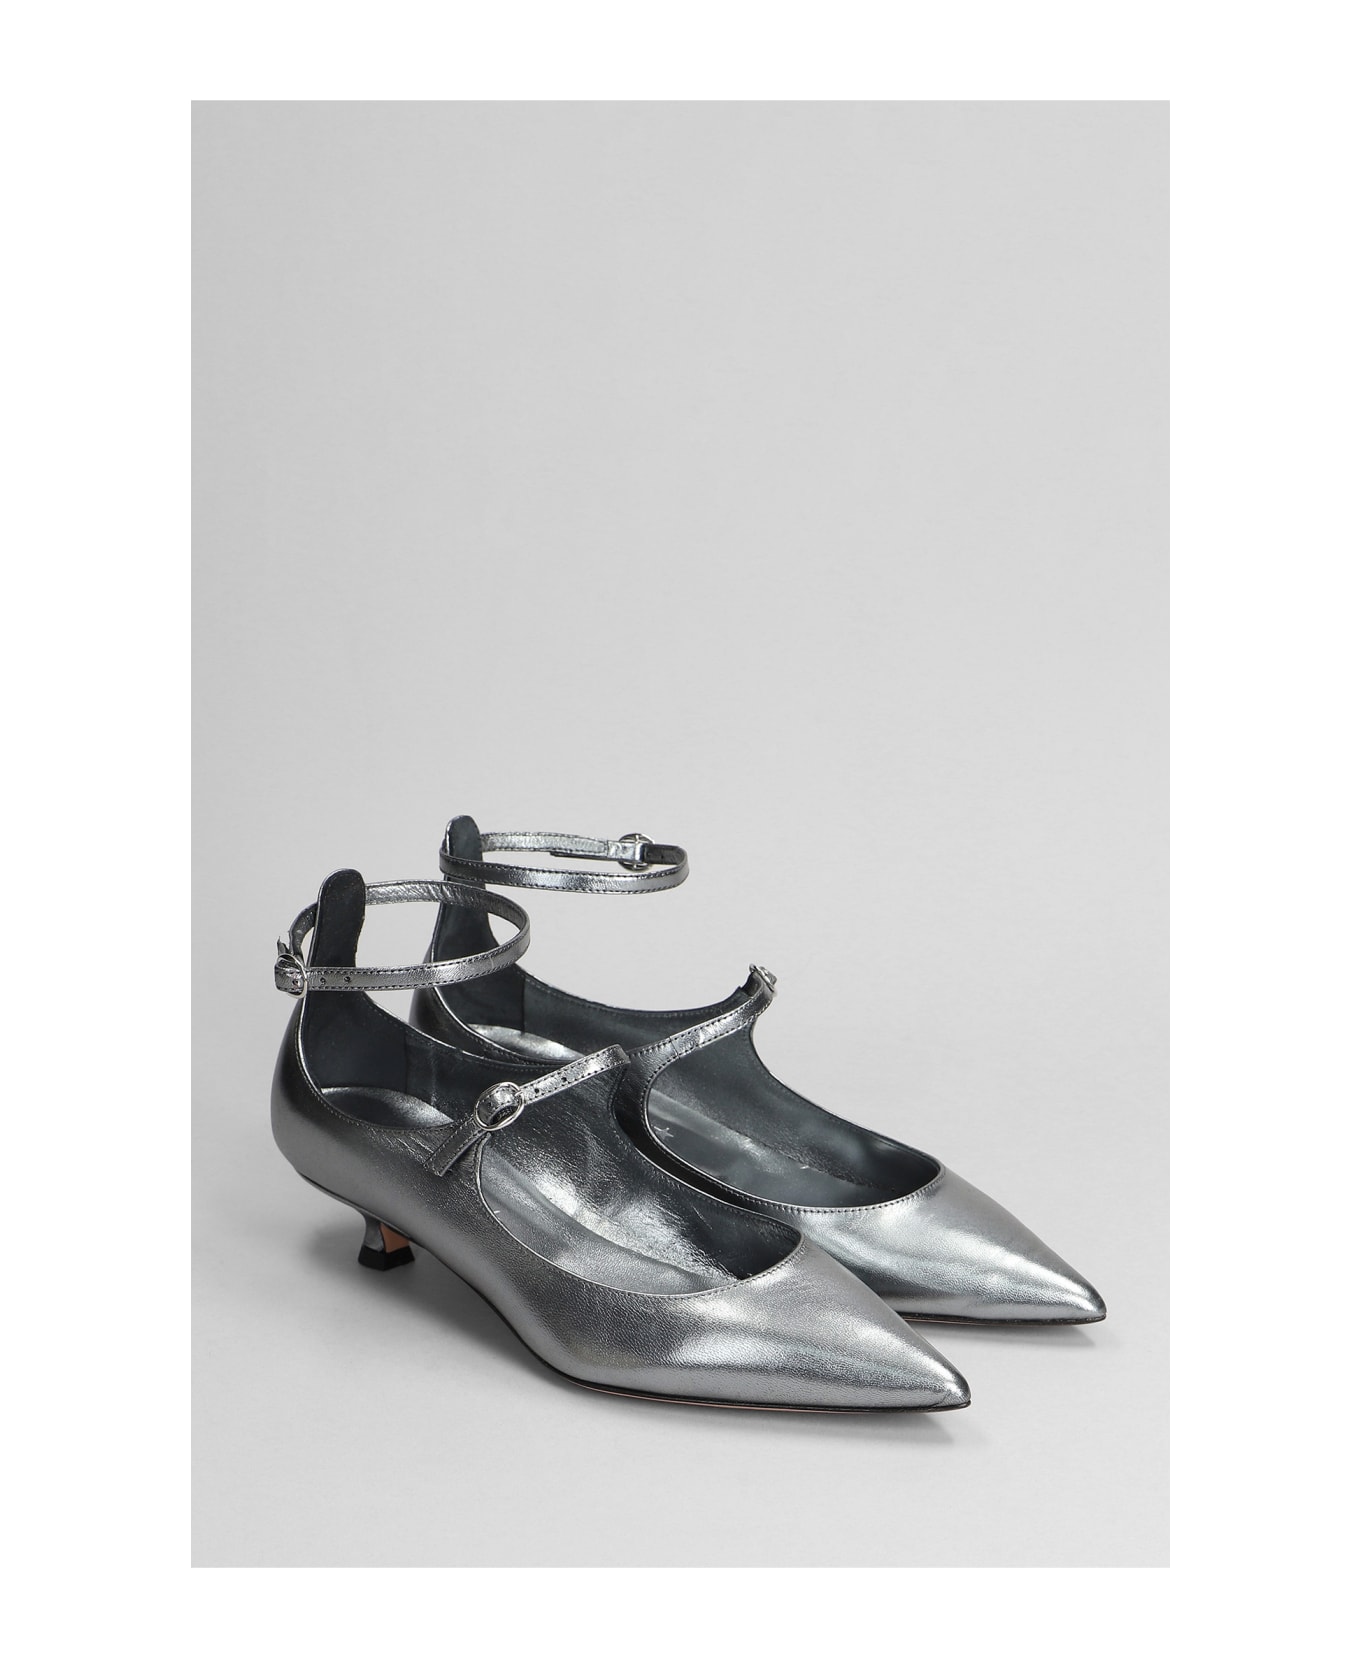 Marc Ellis Pumps In Silver Leather - silver ハイヒール